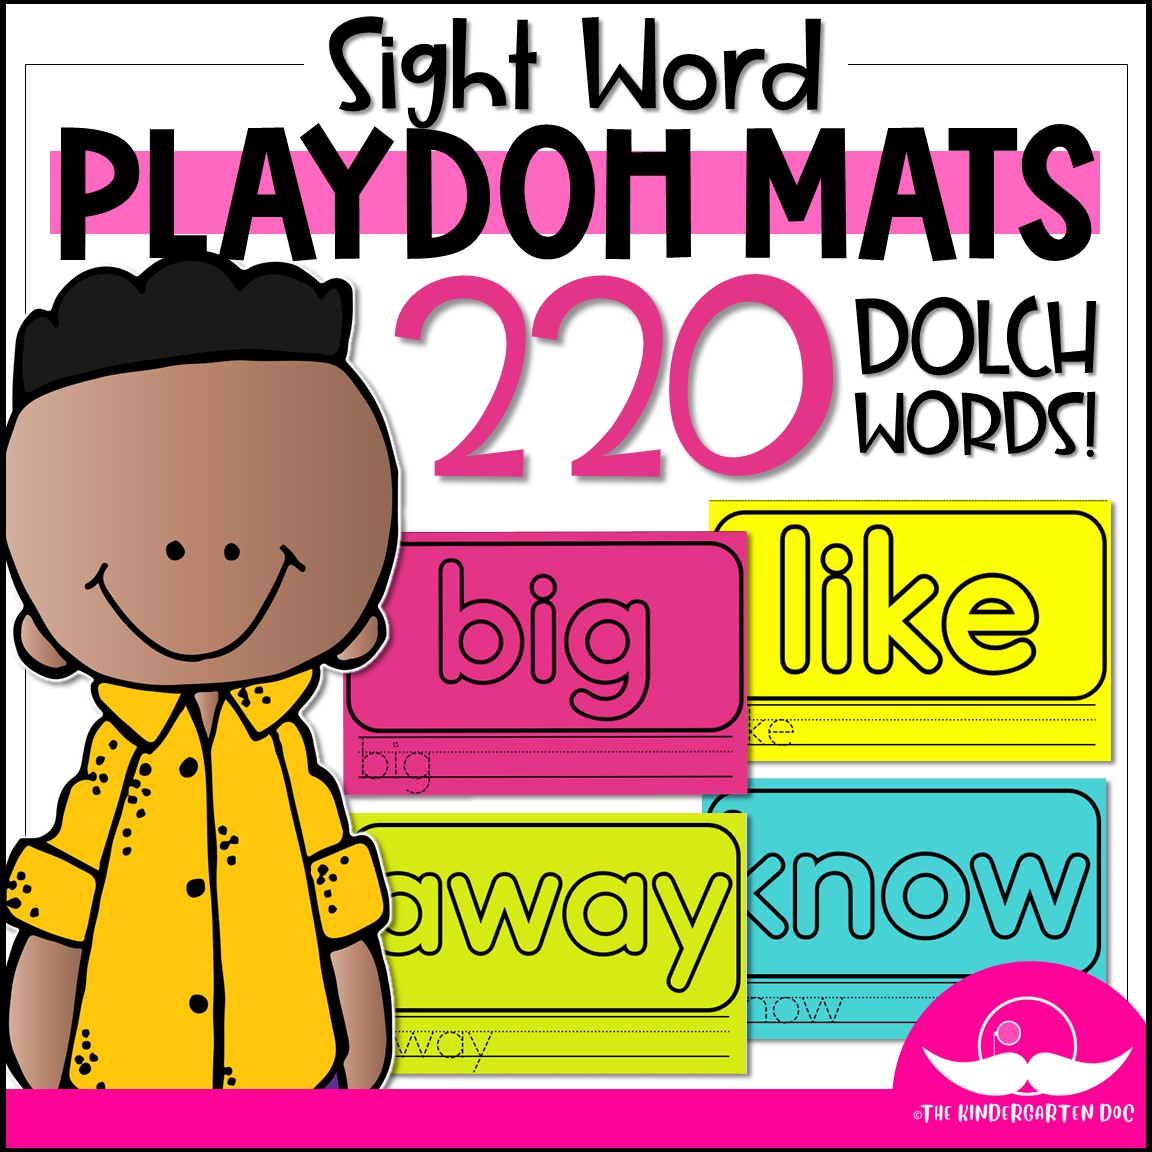 Sight Word Playdoh Mats | DOLCH Sight Words and Nouns teacherspayteachers.com/Product/Sight-… 
Over 300 mats TOTAL. A MUST-HAVE resource in any primary-level classroom! Check out the link for more! 
#educrew #teachertwitter #education #teachers #teacherspayteachers